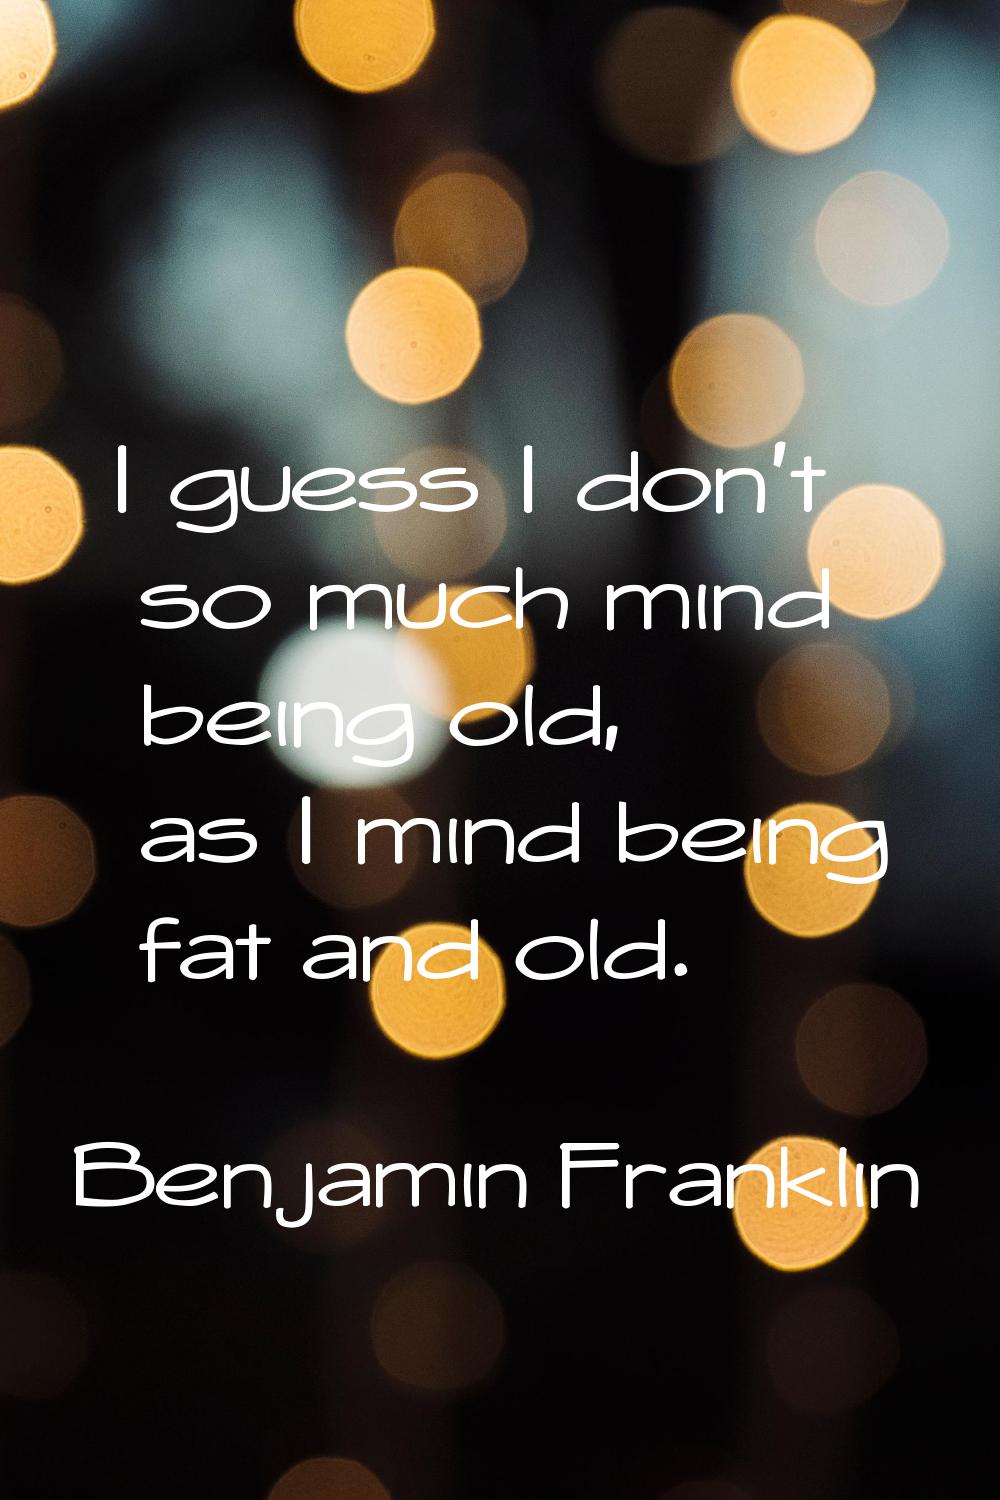 I guess I don't so much mind being old, as I mind being fat and old.